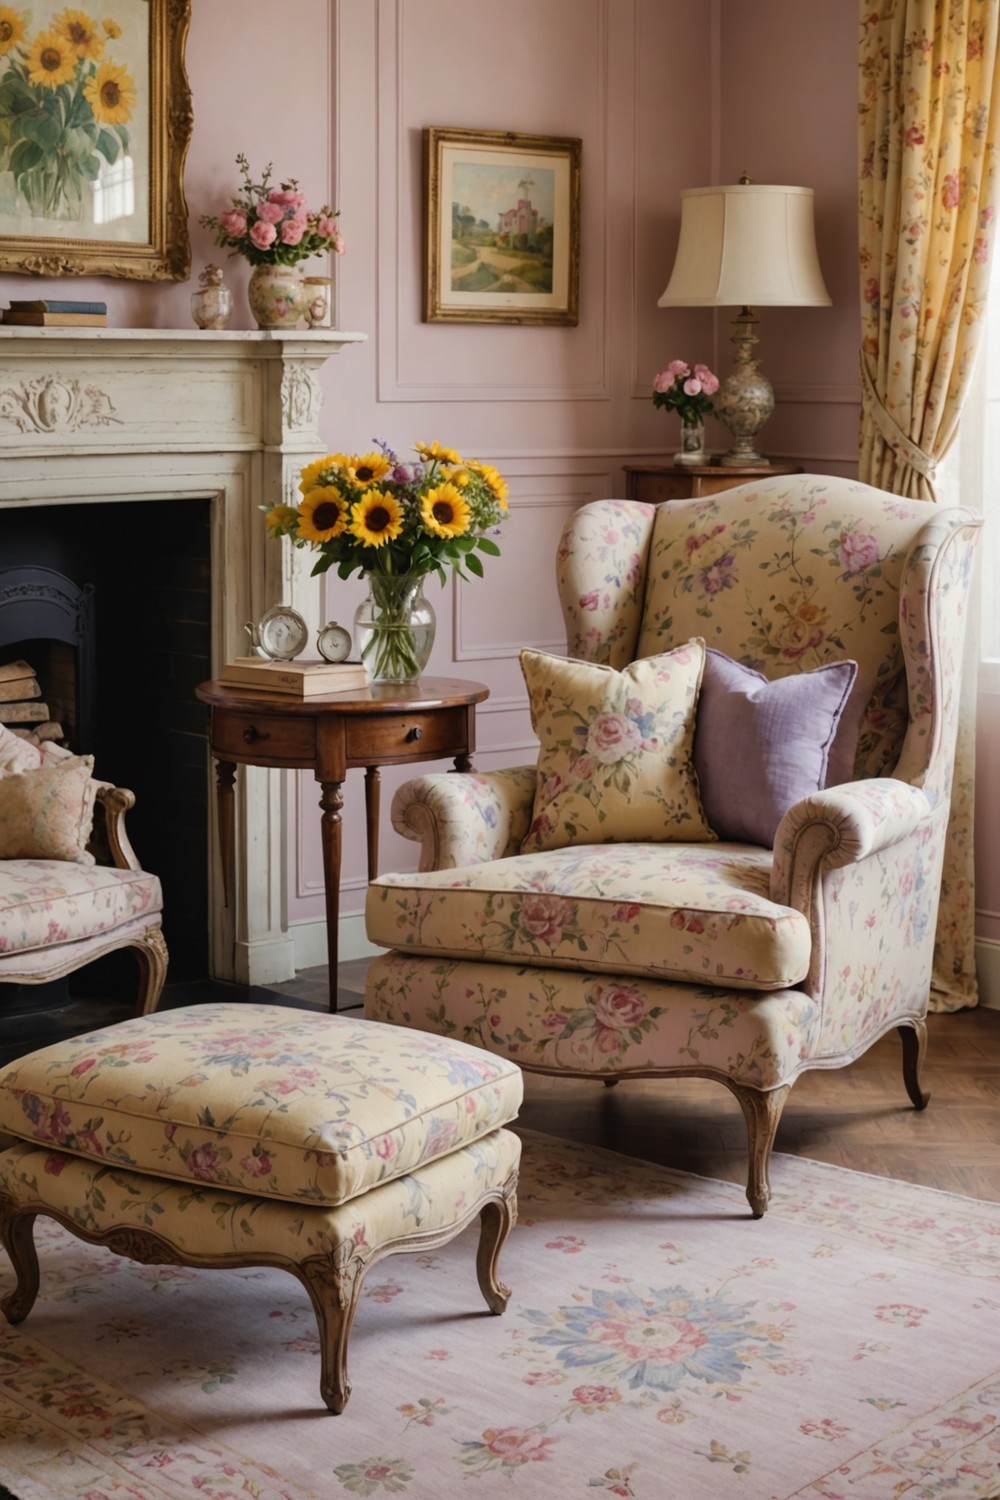 Floral Patterns in Upholstery and Fabrics